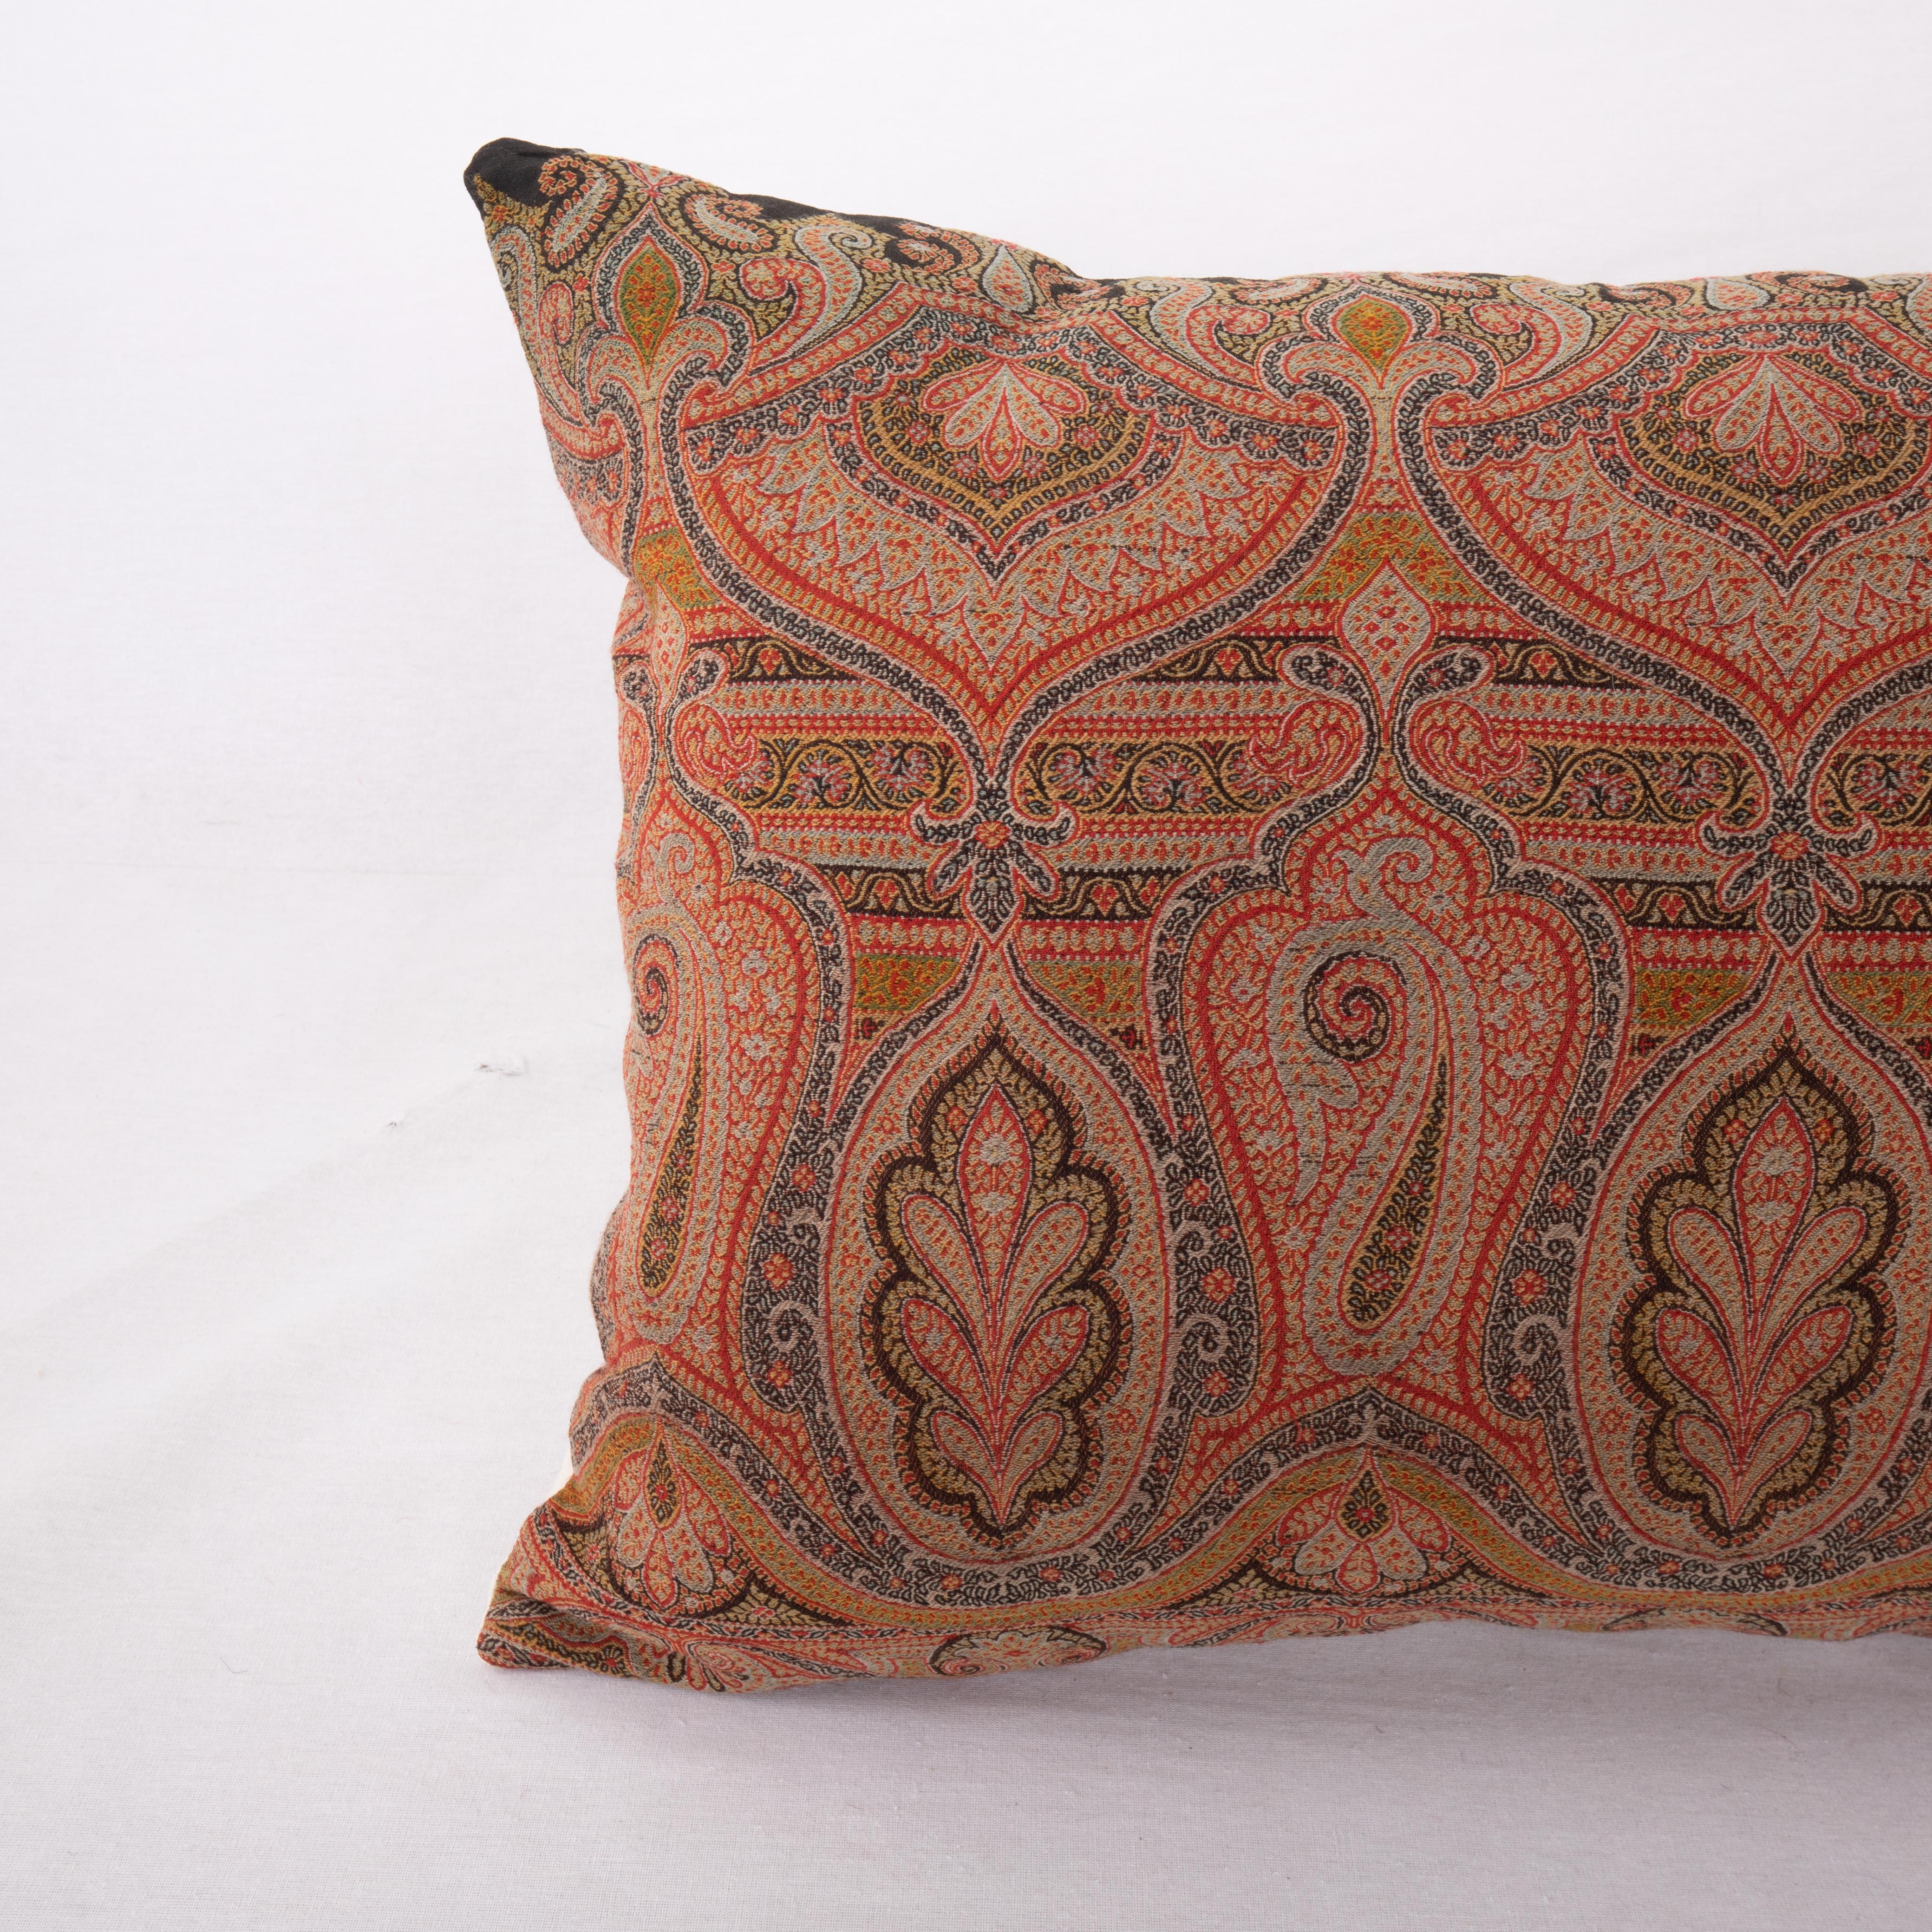 French Antique Pillow Cover Made from a European Wool Paisley Shawl, L 19th/ E.20th